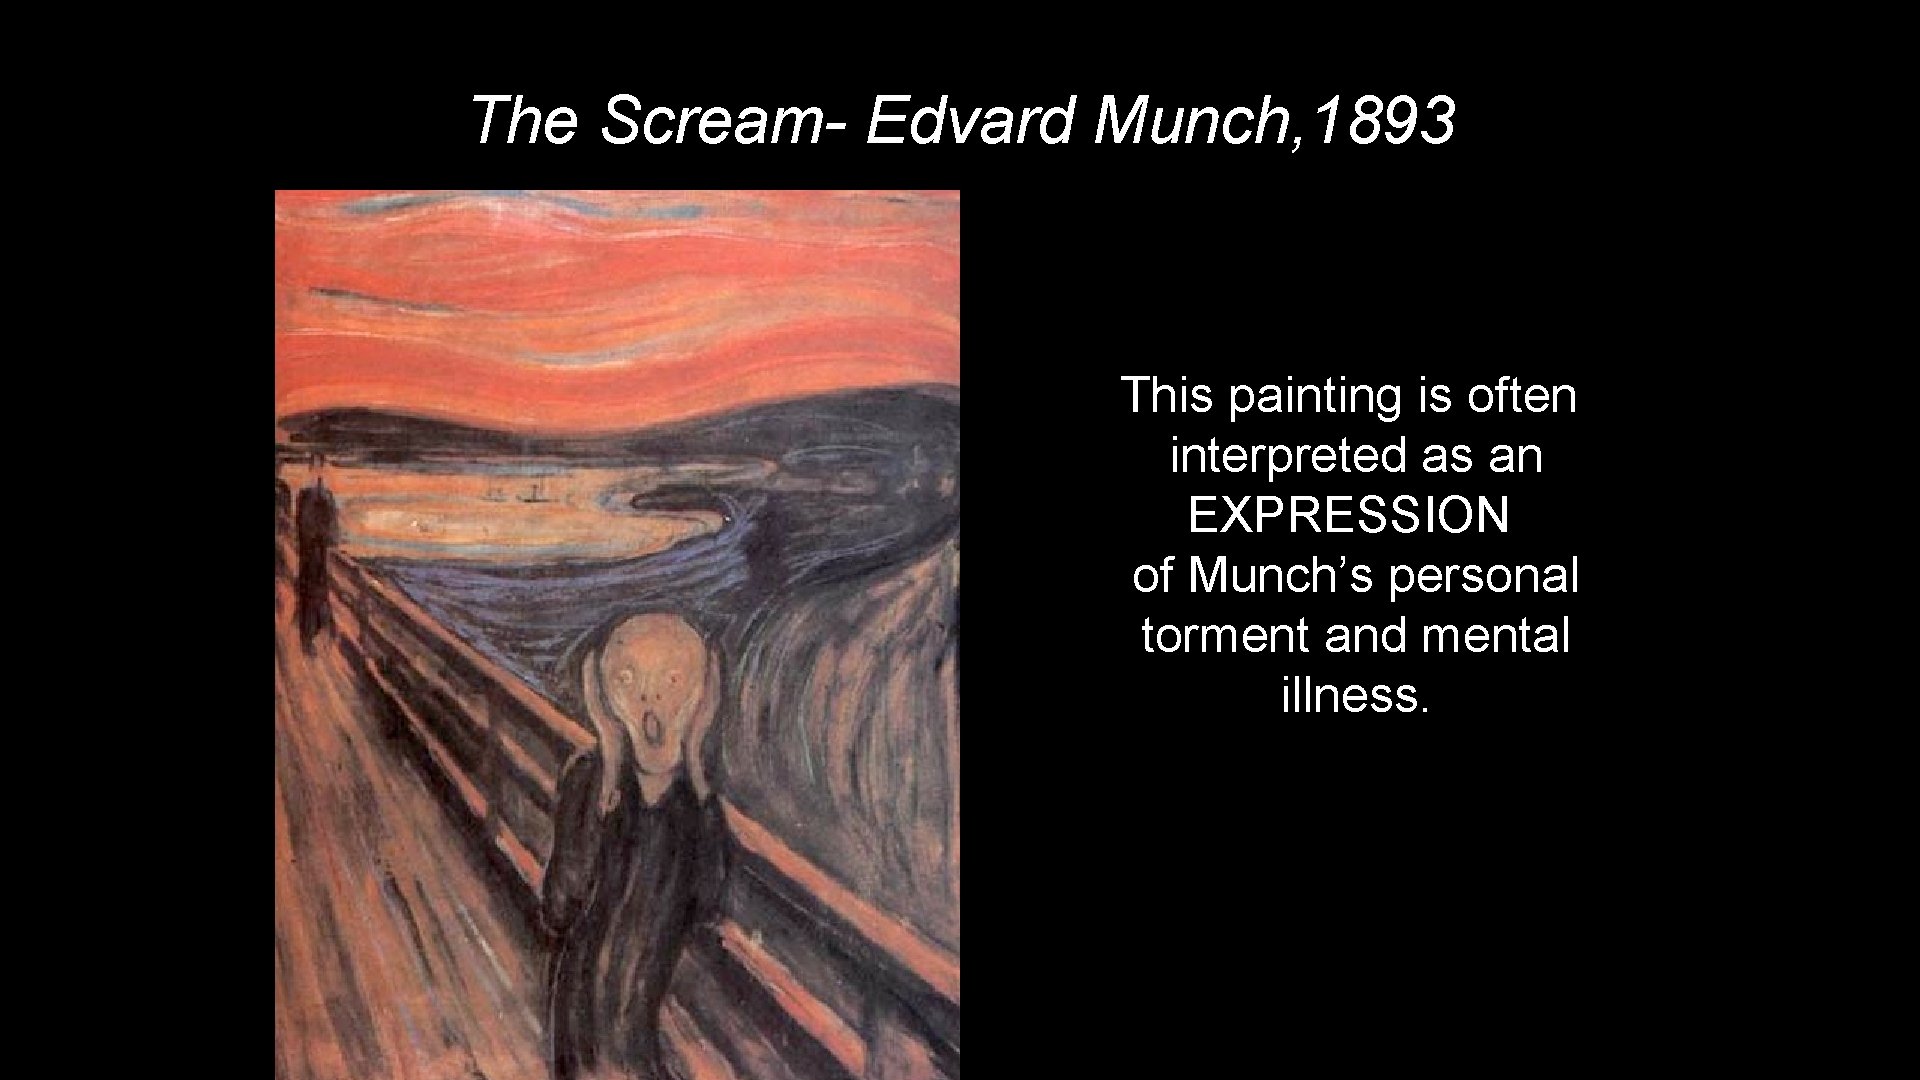 The Scream- Edvard Munch, 1893 This painting is often interpreted as an EXPRESSION of